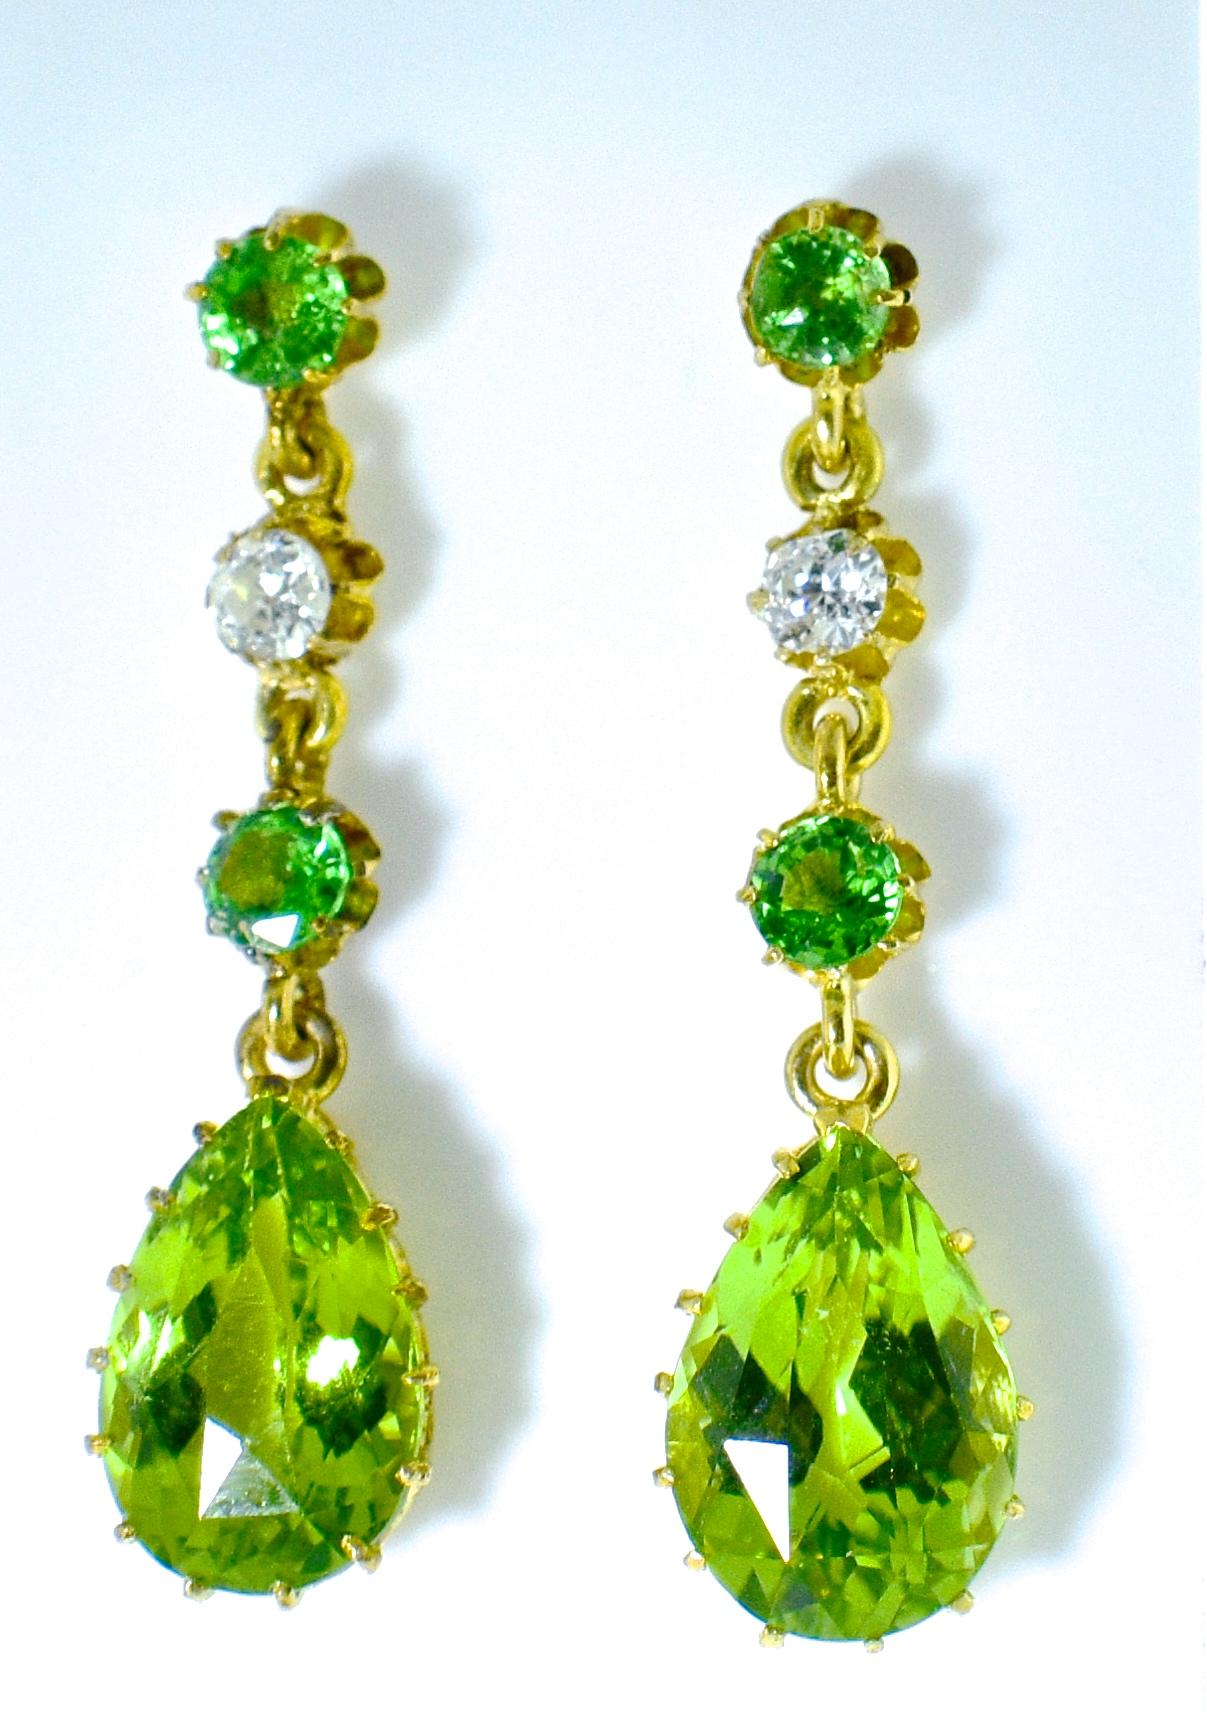 Antique natural bright green Peridots are set in multi prongs in these pendant style earrings.  The 6 peridots weigh approximately 7.5 cts.  There are also two white old European cut diamonds weighing approximately .30 cts.  These earrings are 1.25